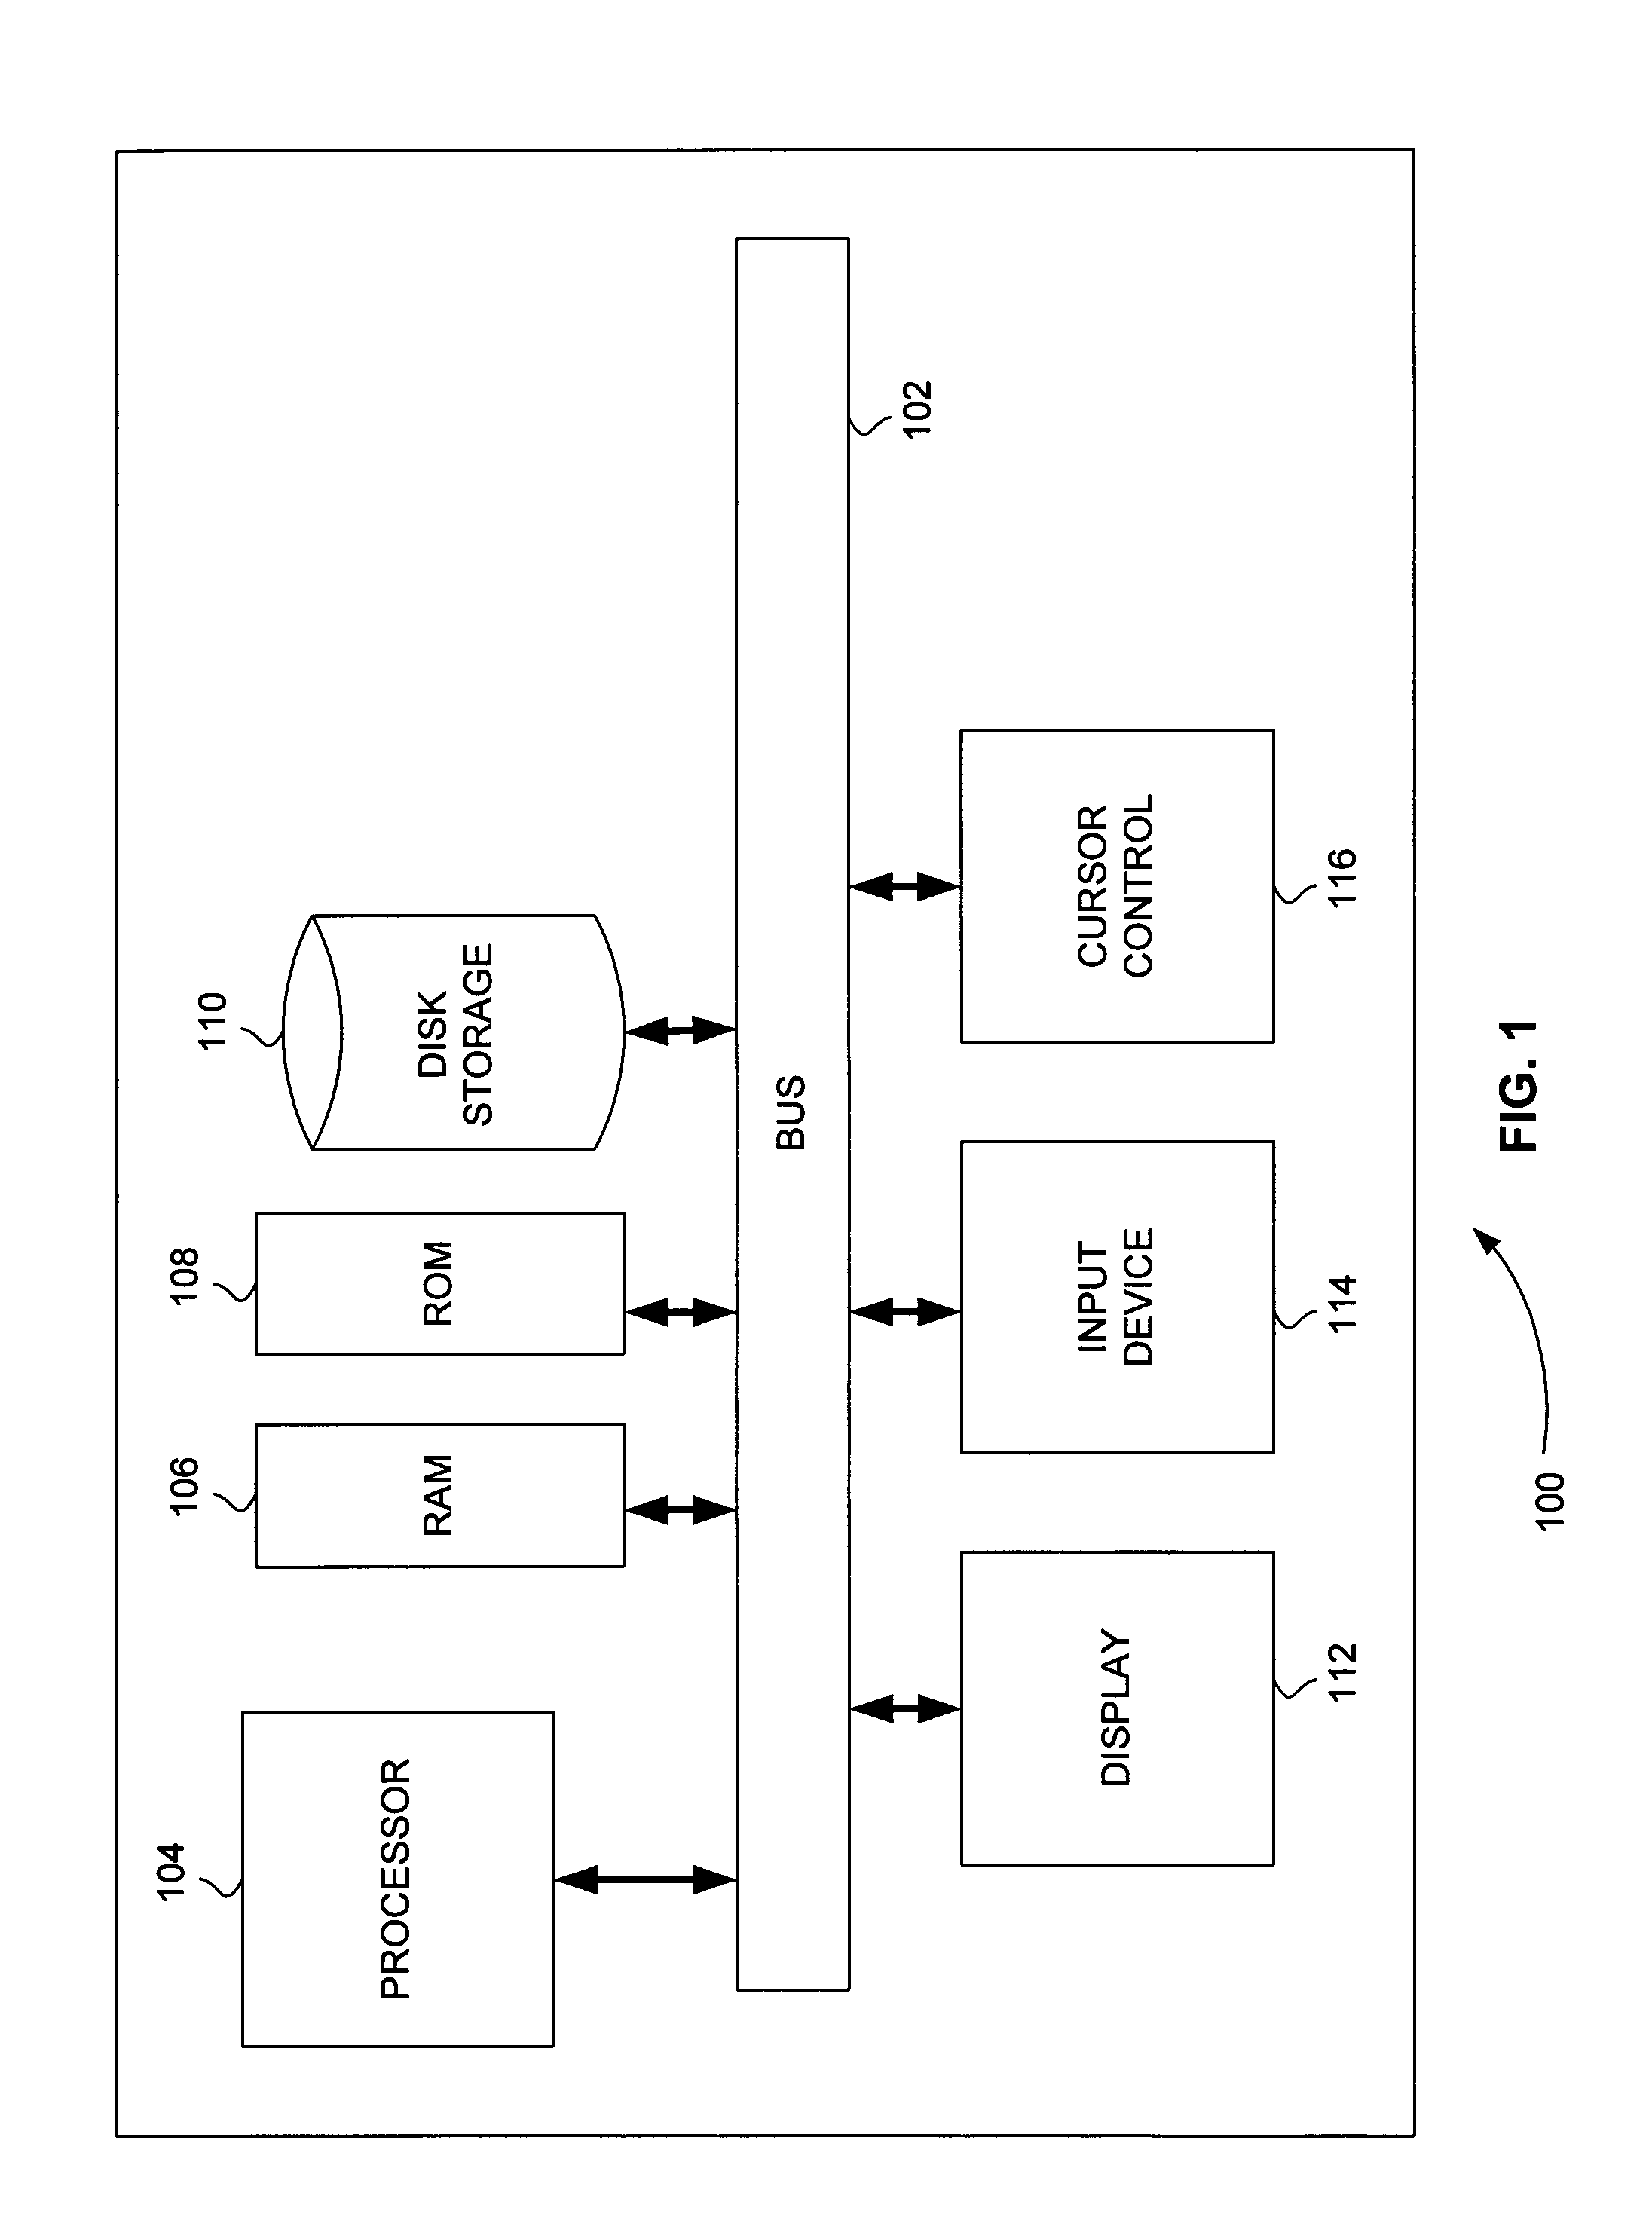 Method for Triggering Dependent Spectra for Data Acquisition